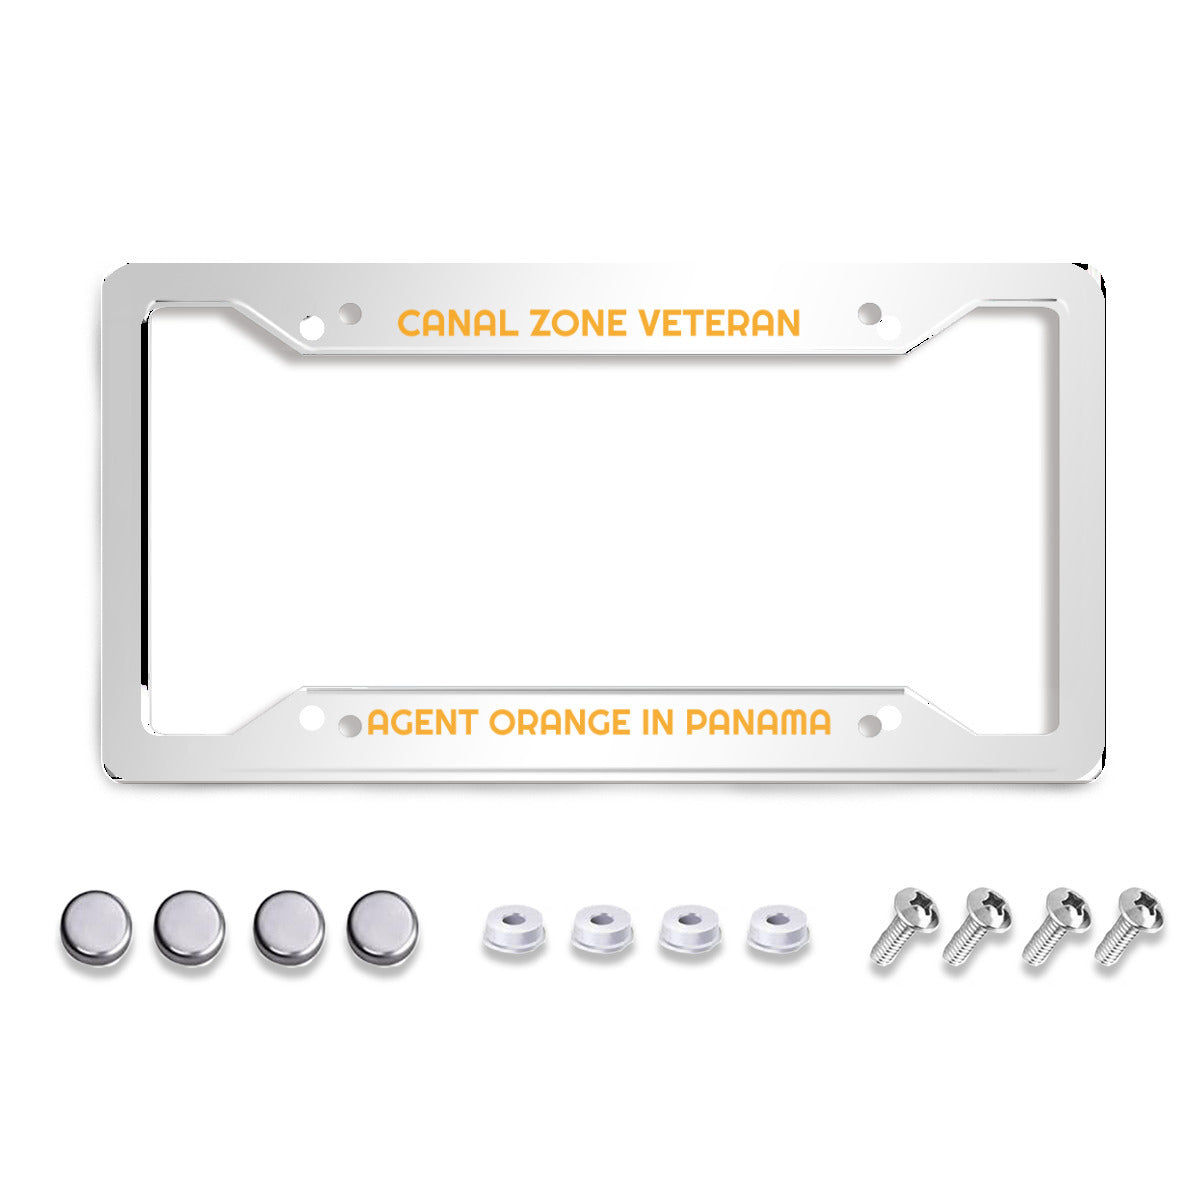 U.S. Standard 4-hole license plate frame holder - SHIPPING INCLUDED